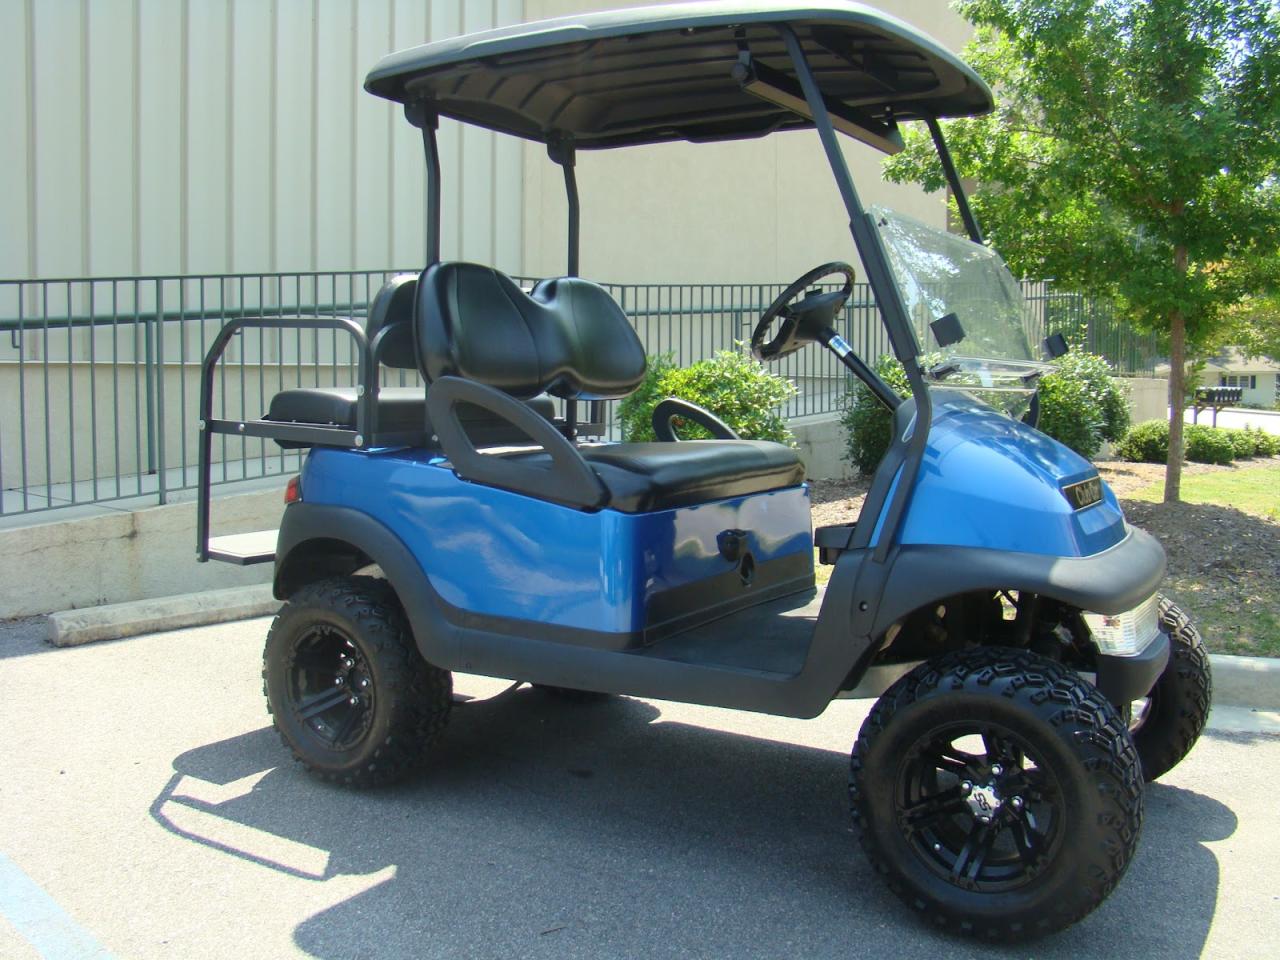 Find Your Dream Golf Cart: Used Golf Carts for Sale by Owner in Box Elder, Utah